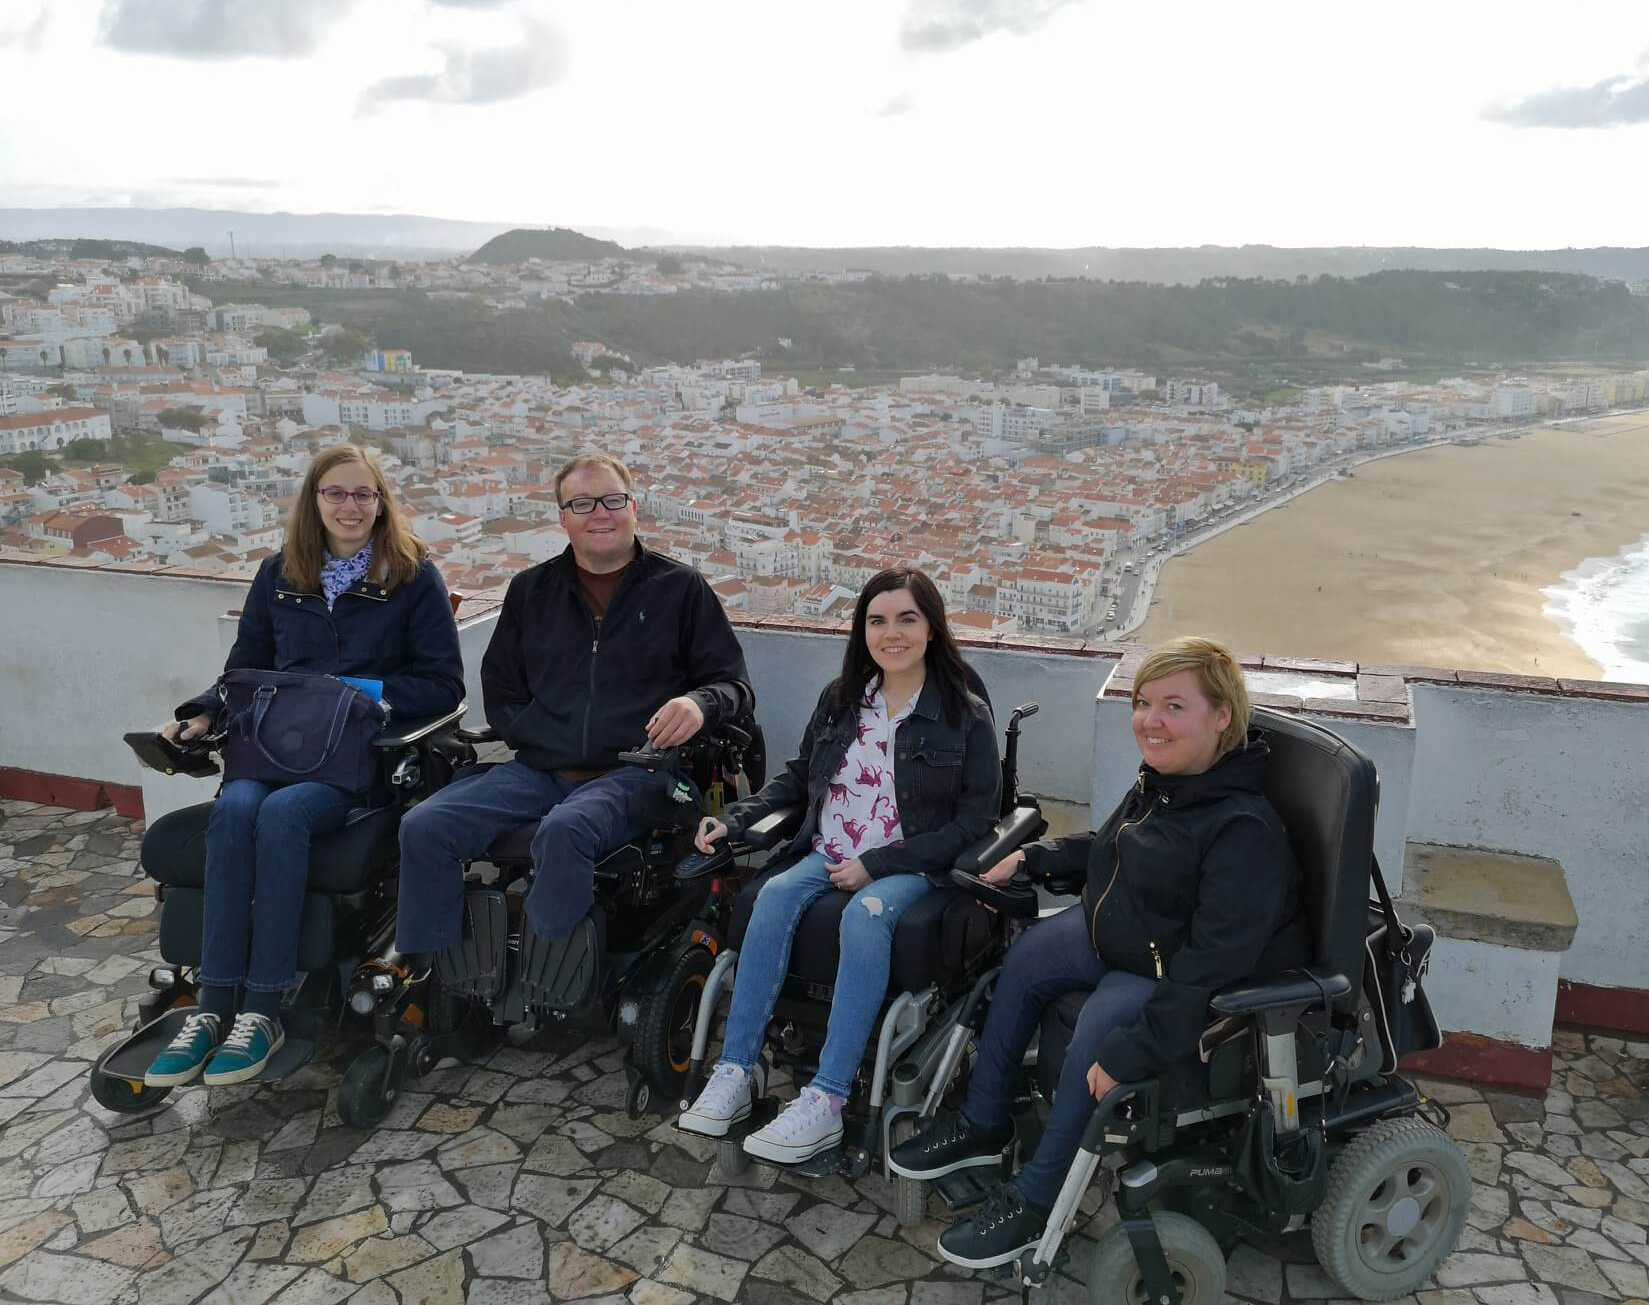 Emma with John Morris, Sanna and Blandine, a group of accessible travel bloggers. They are sitting in their wheelchairs with the Nazaré beach behind them.